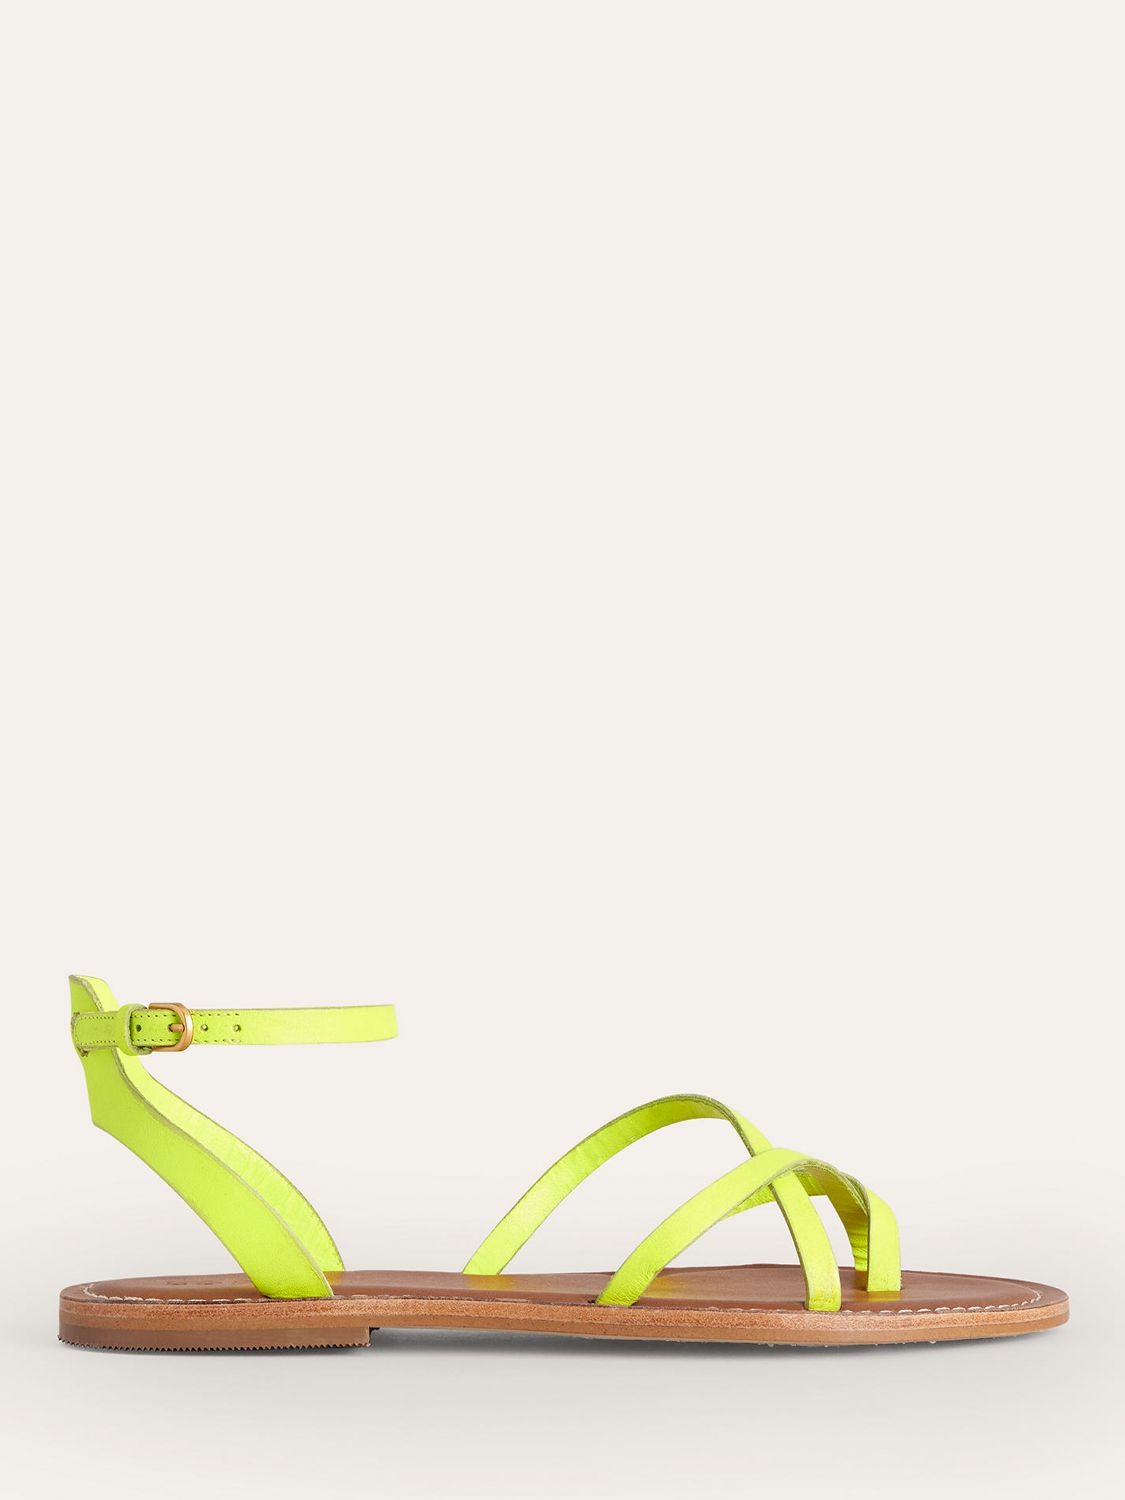 Boden Easy Flat Leather Sandals, Citrus Box at John Lewis & Partners